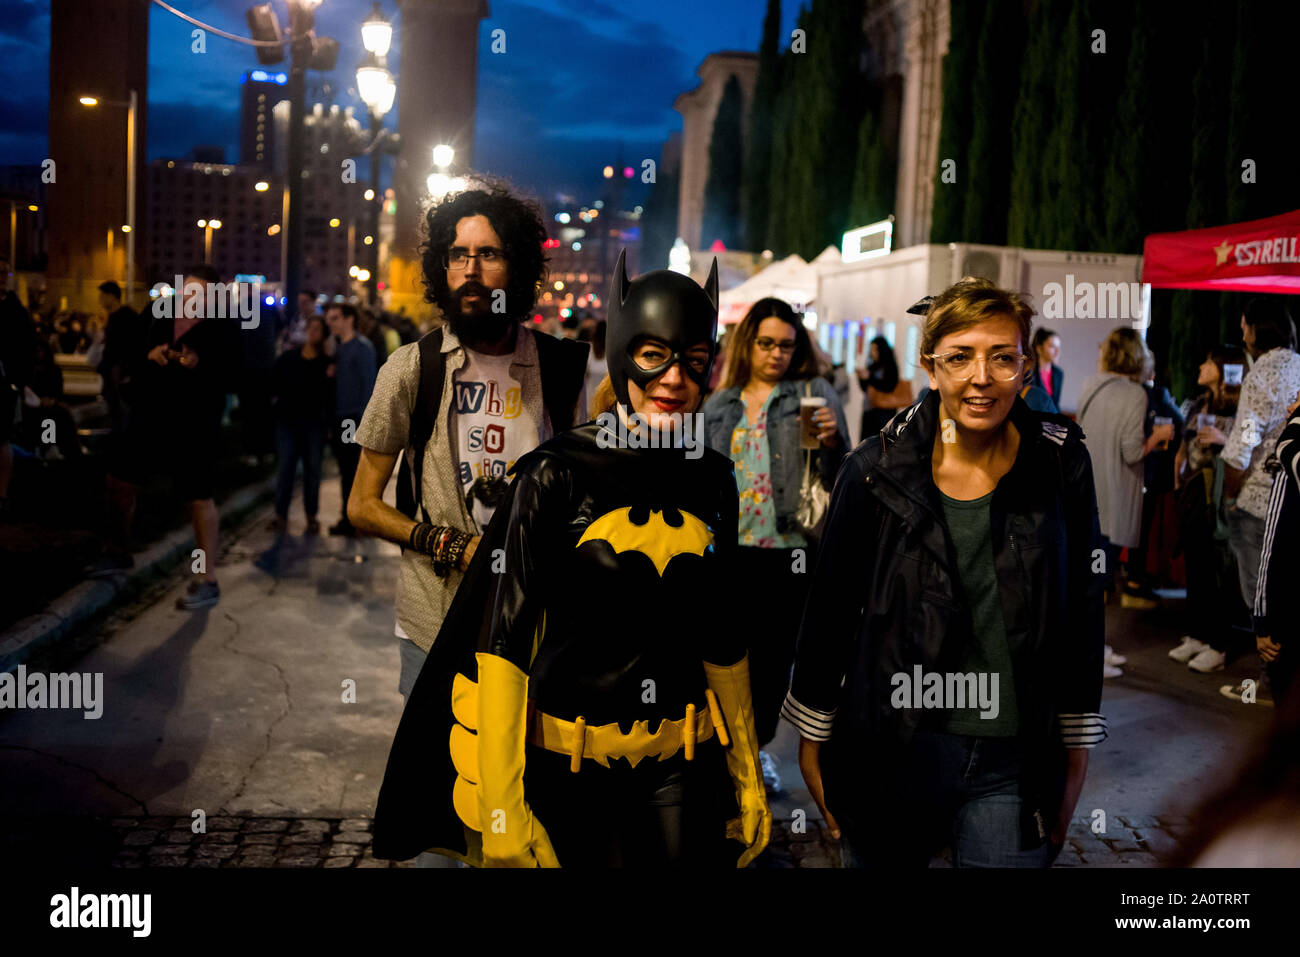 Barcelona, Catalonia, Spain. 21st Sep, 2019. A woman goes dressed as Batman  in Barcelona on occasion of the character's 80th anniversary. Credit: Jordi  Boixareu/ZUMA Wire/Alamy Live News Stock Photo - Alamy